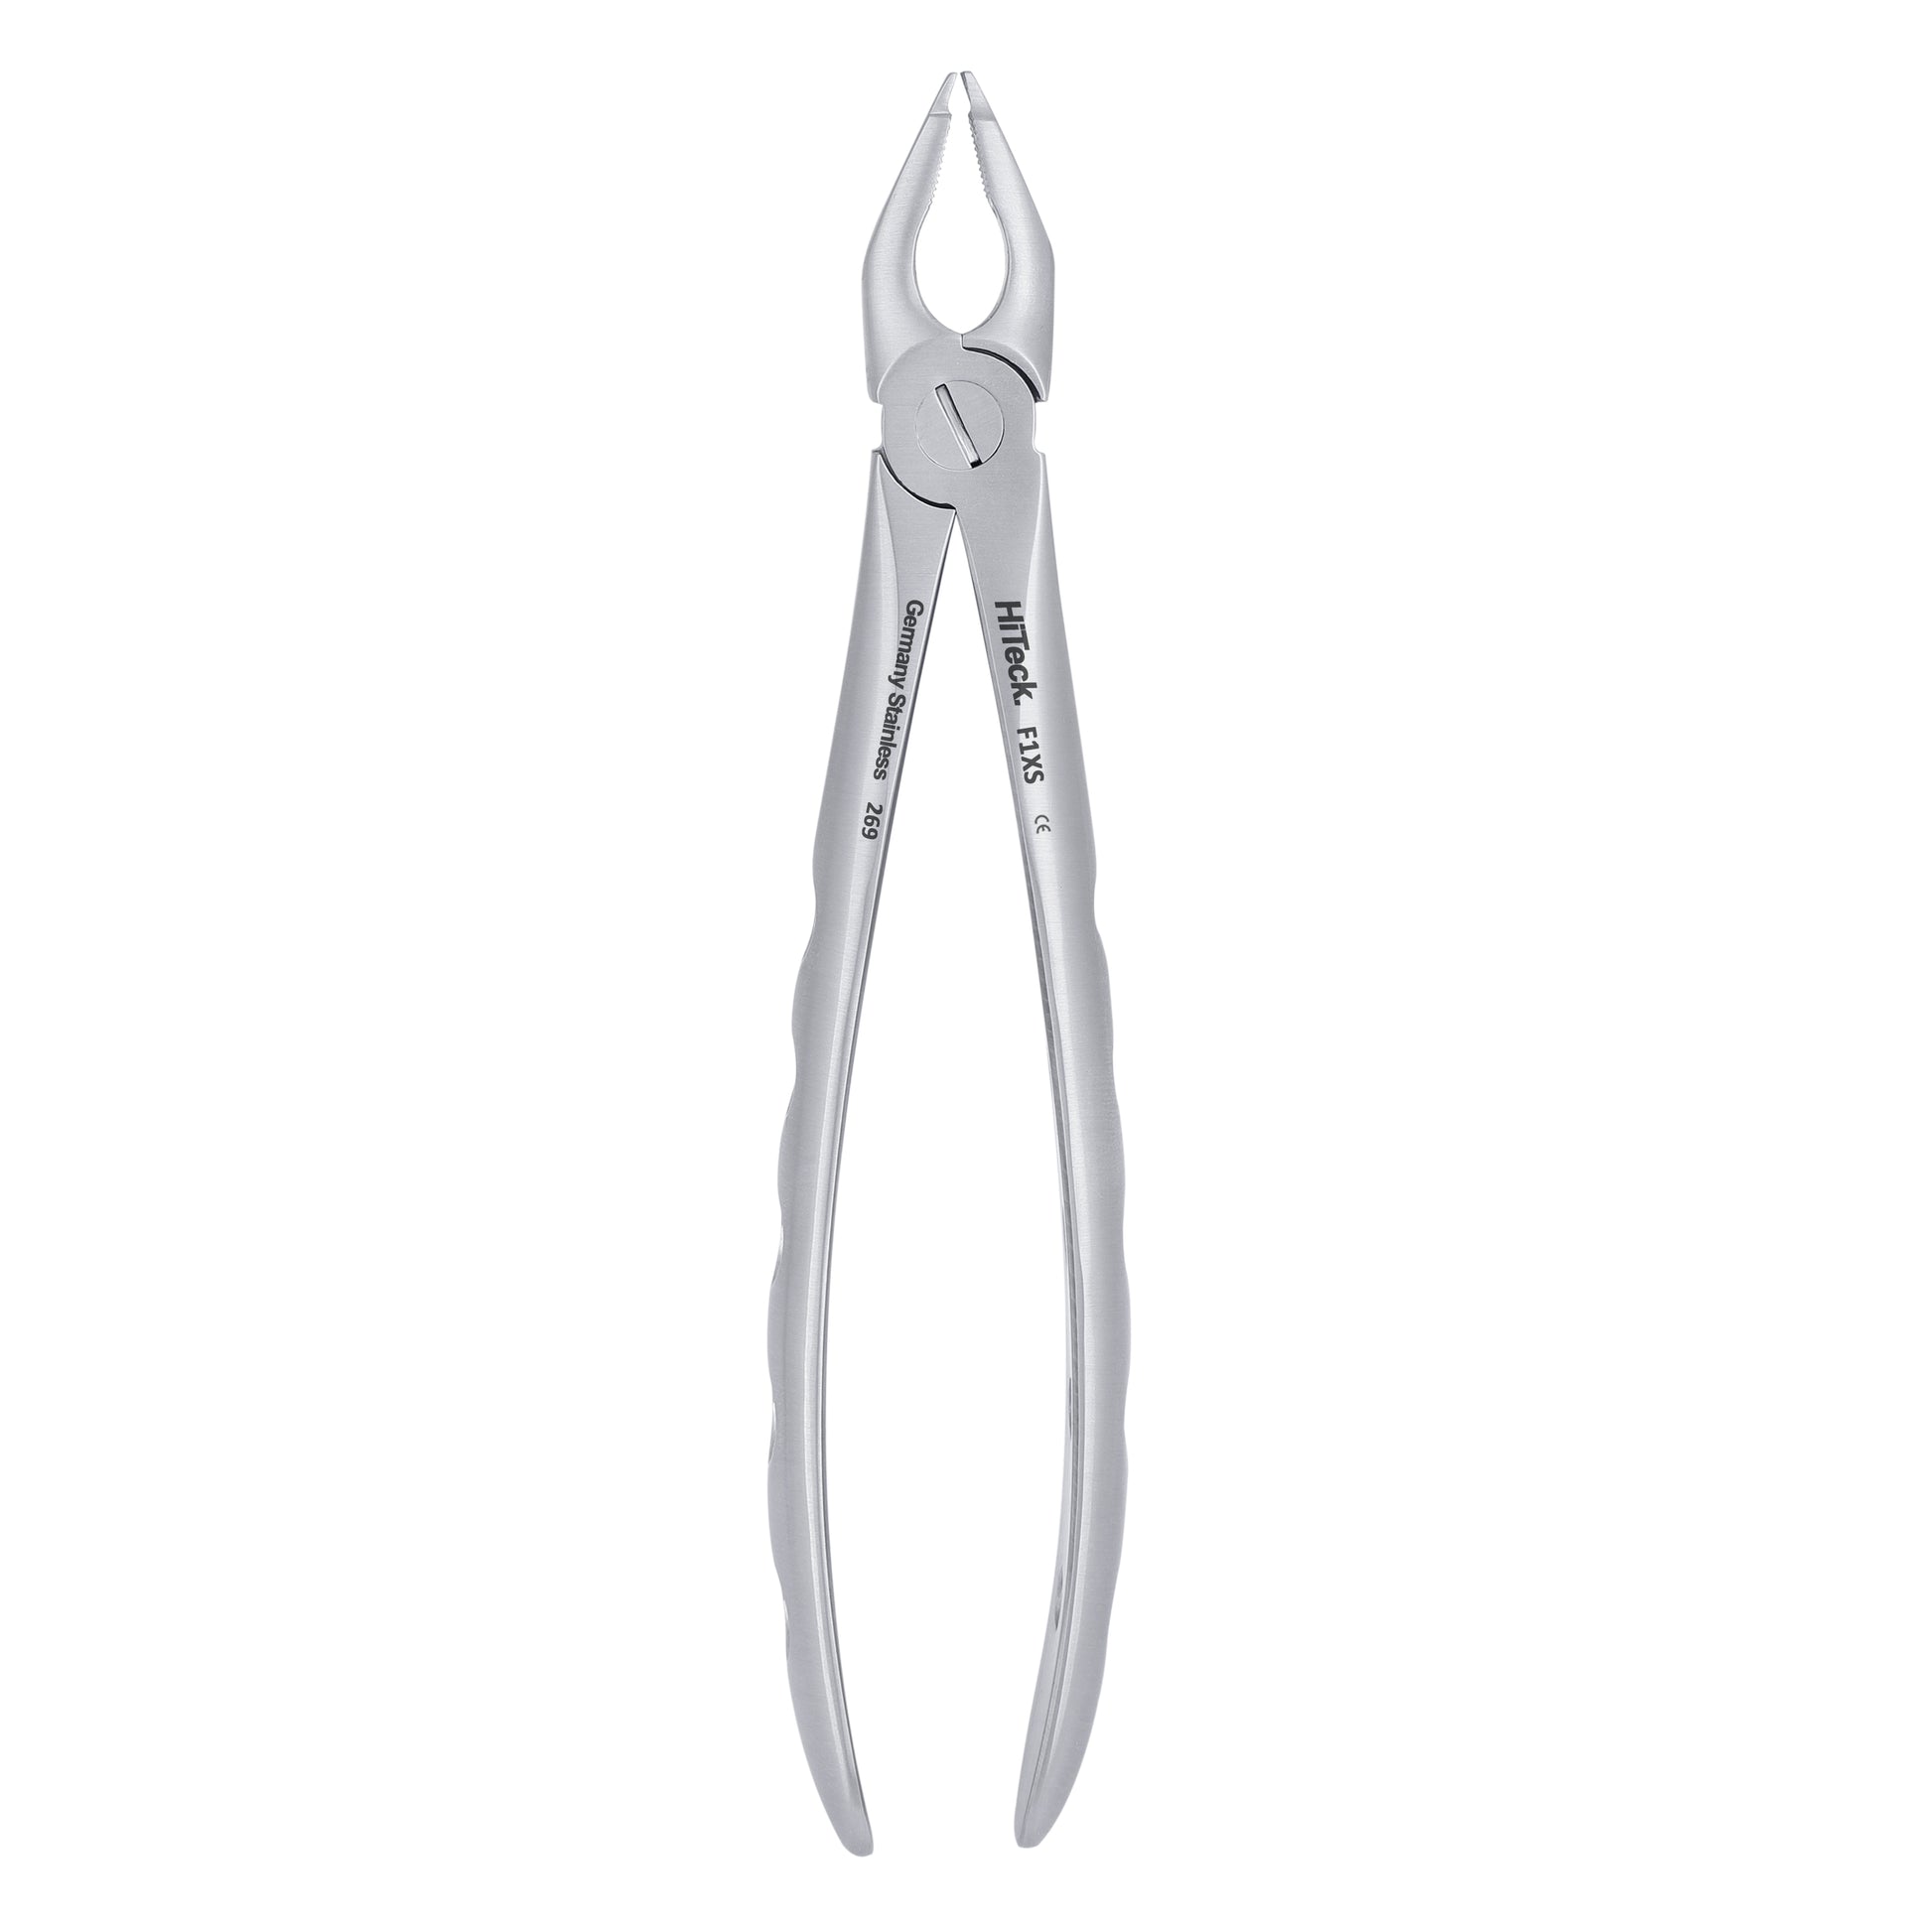 1 Upper Incisors Atraumair Extraction Forceps - HiTeck Medical Instruments